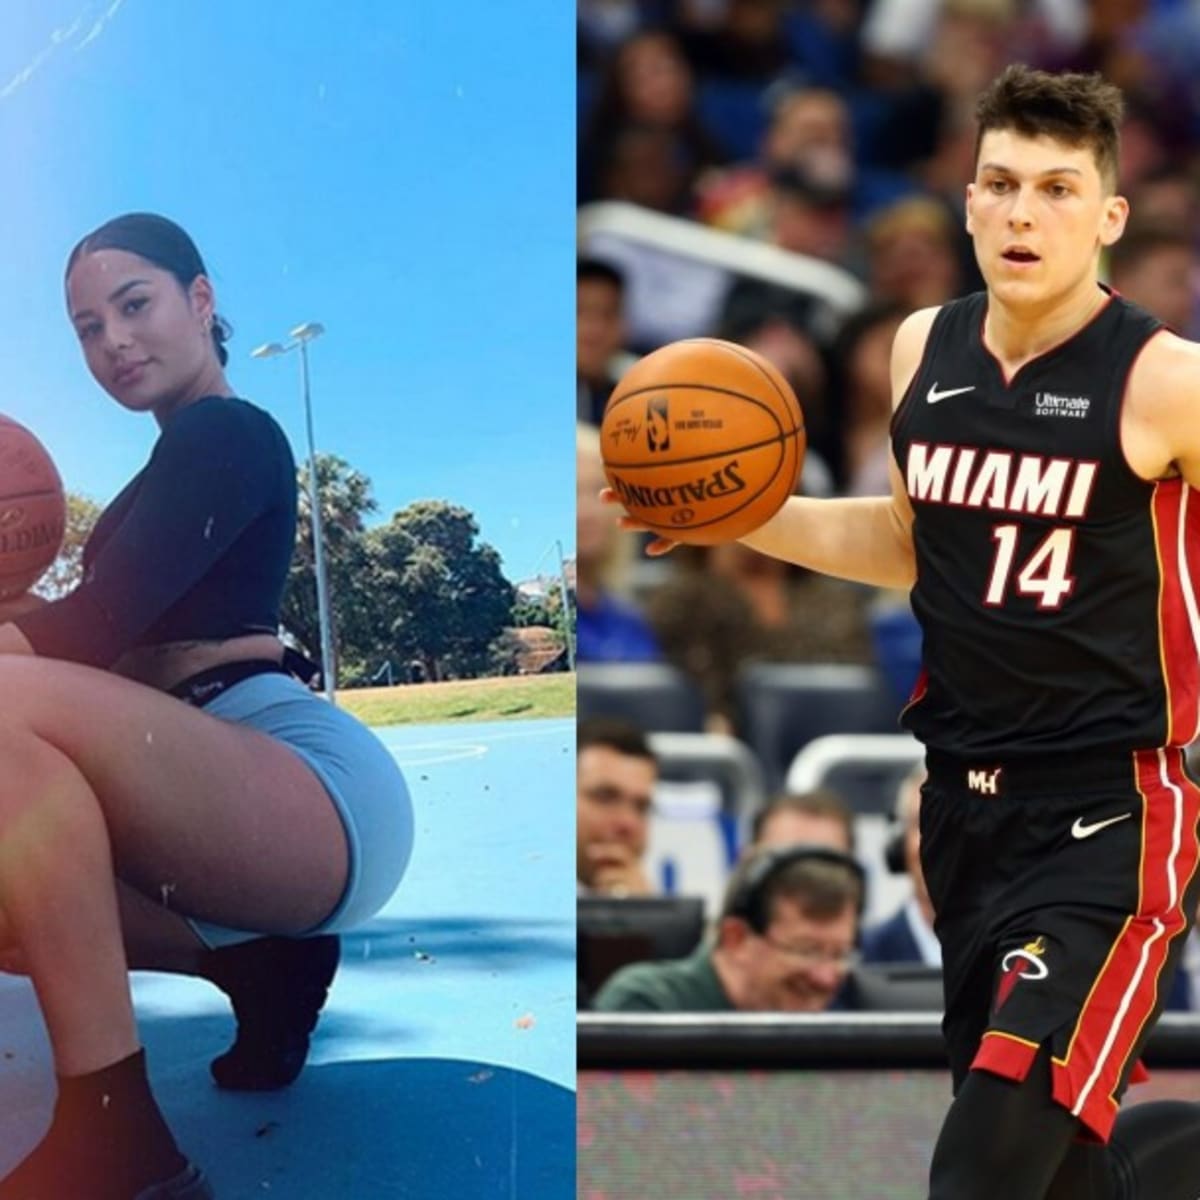 Tyler Herro's girlfriend Katya Elise Henry says you should buckle up if  you want to date an NBA player